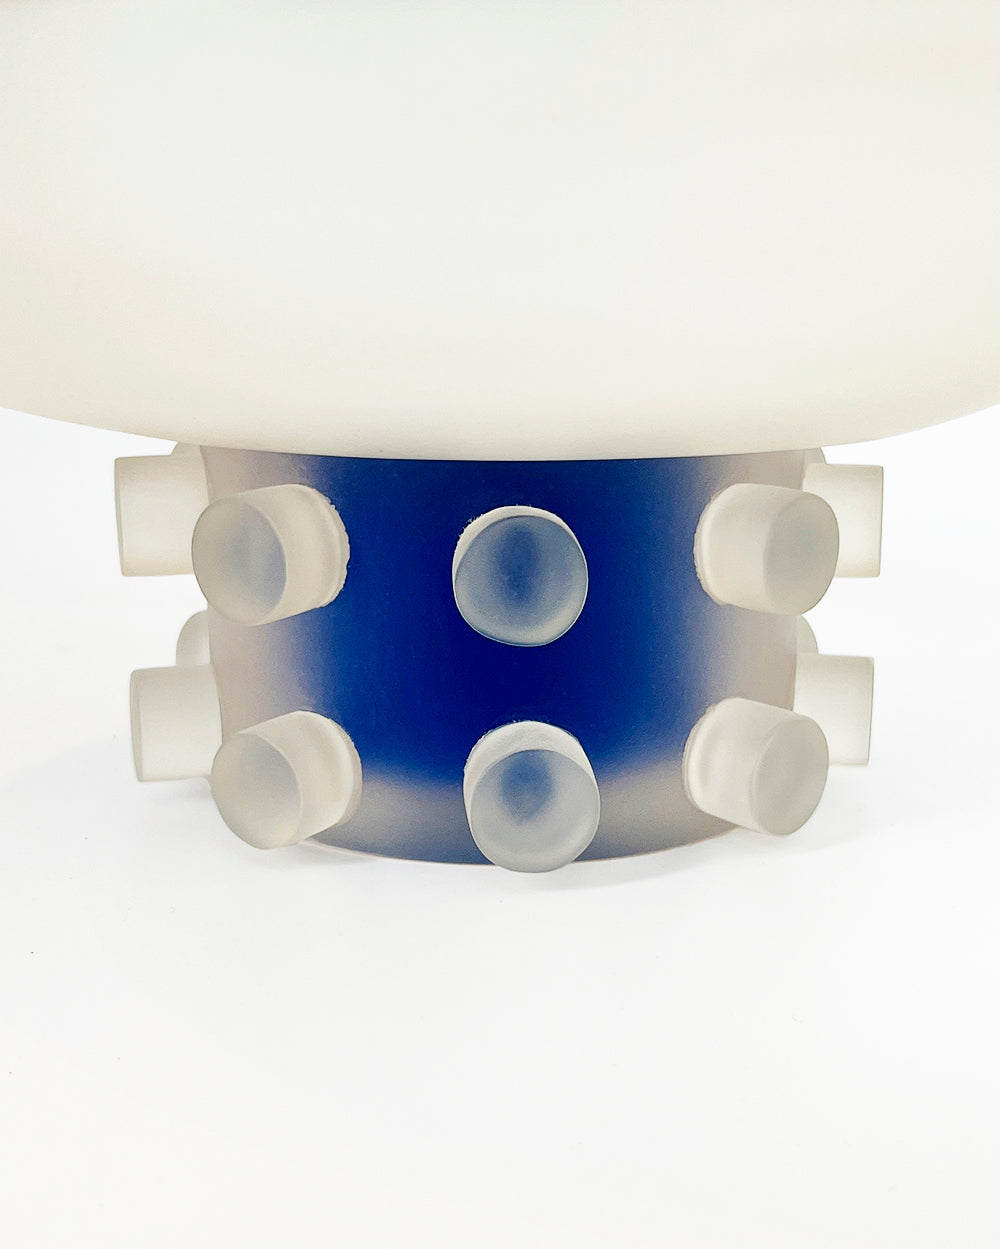 Xilitla Clear and Blue Resin Pedestal Bowl